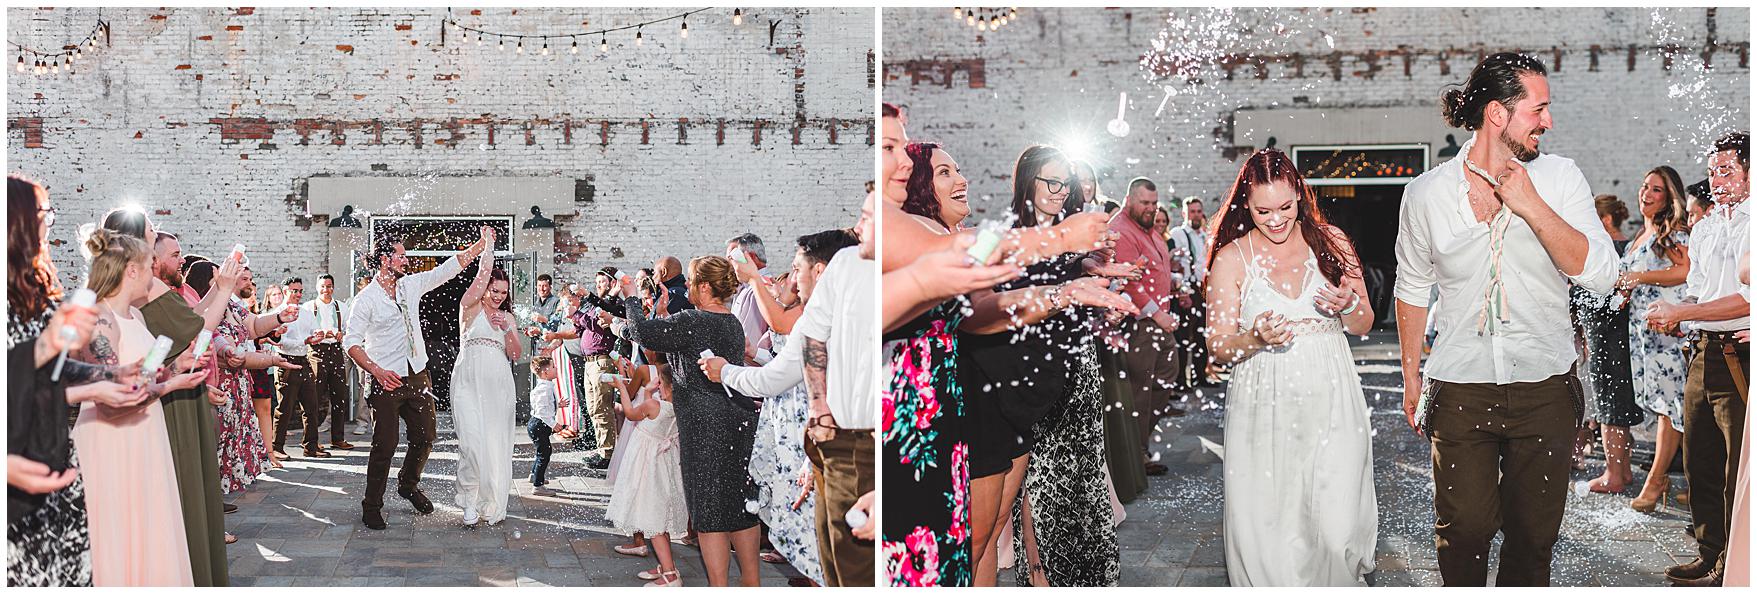 Bride and groom share a confetti exit on their wedding day